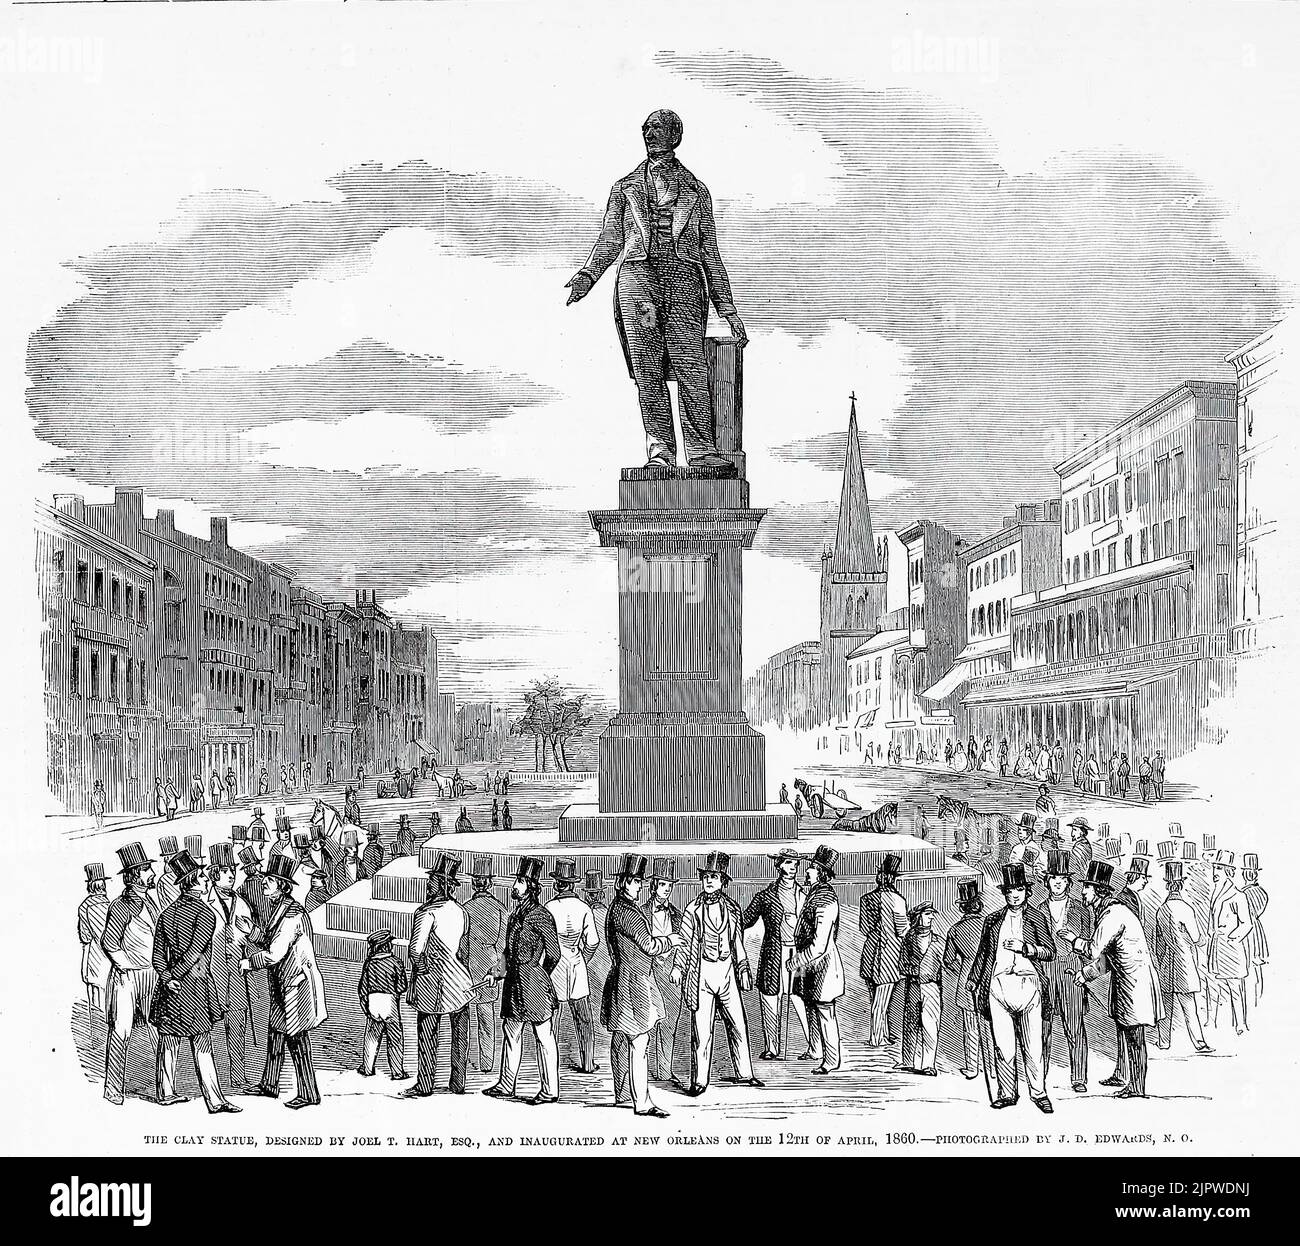 The Henry Clay statue, designed by Joel Tanner Hart, and inaugurated at New Orleans, Louisiana, April 12th, 1860. 19th century illustration from Frank Leslie's Illustrated Newspaper Stock Photo